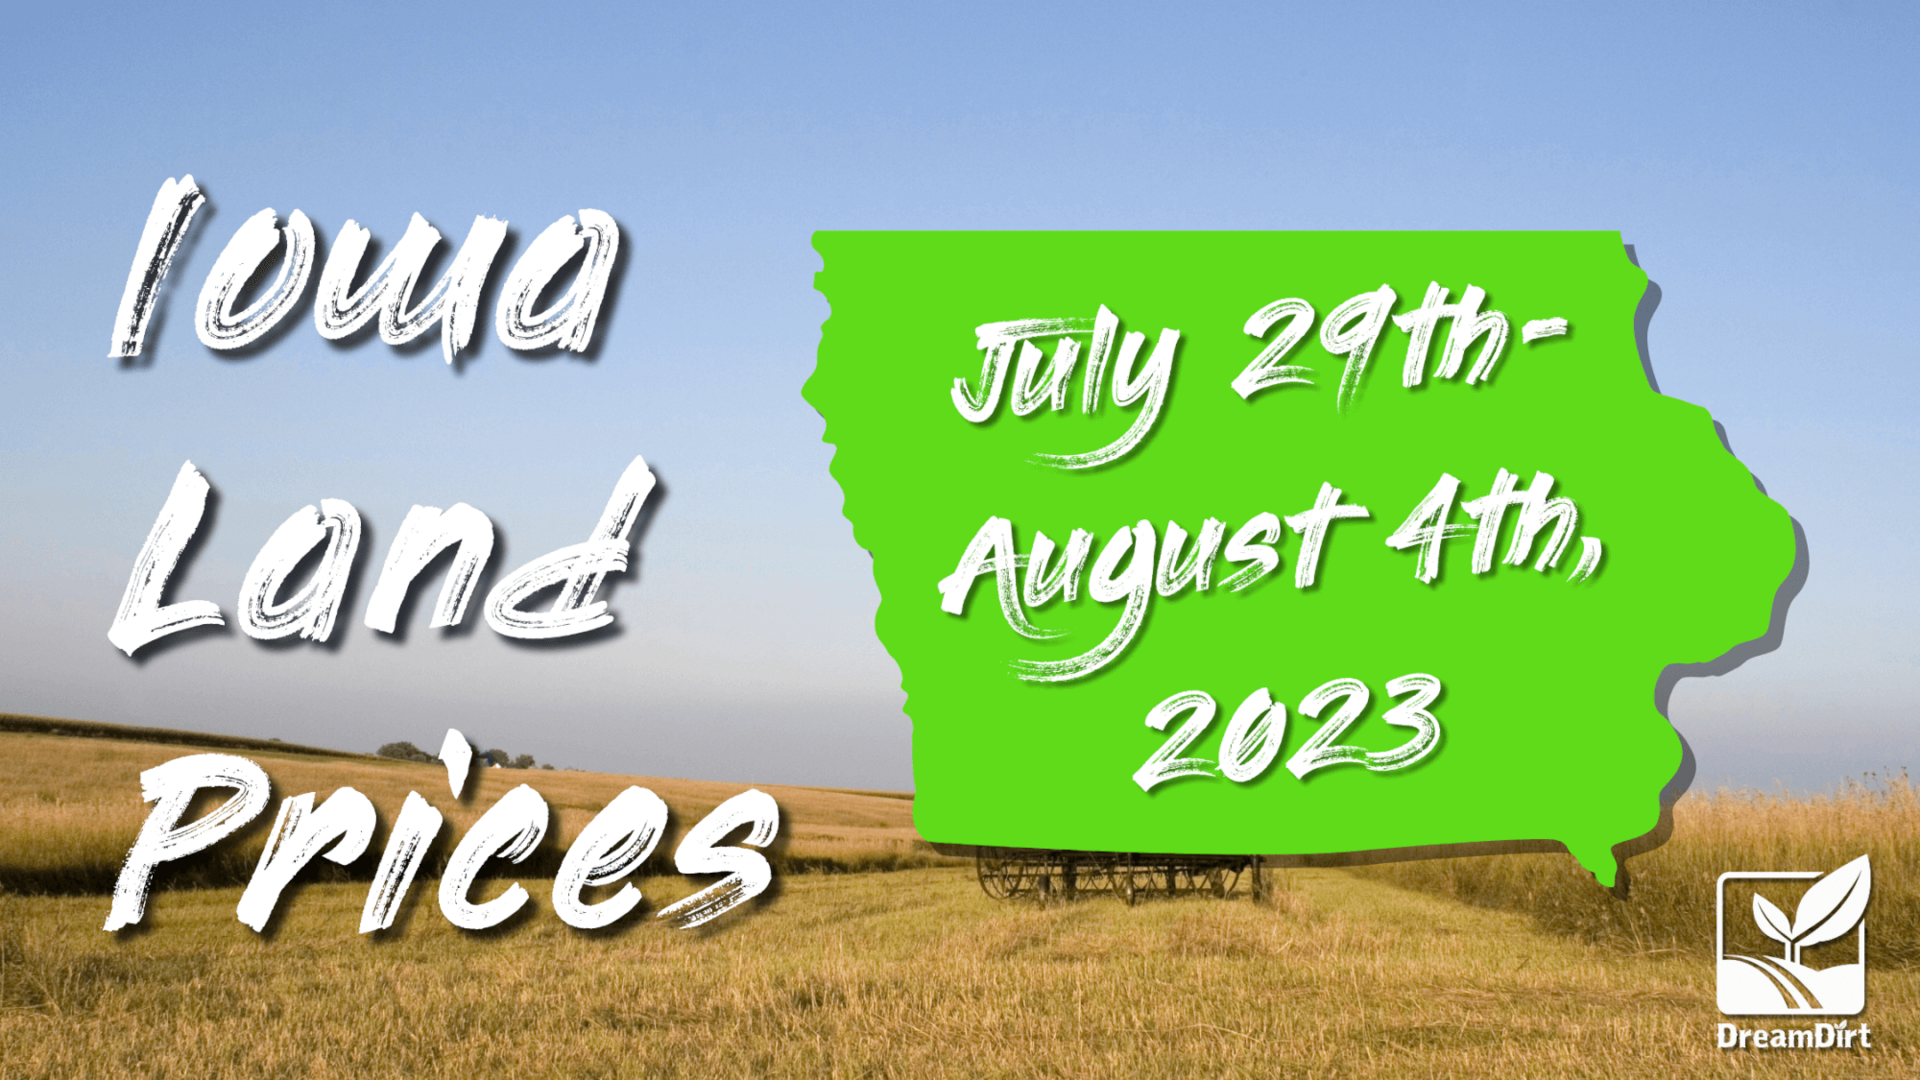 Current farmland prices in Iowa July - August 2023